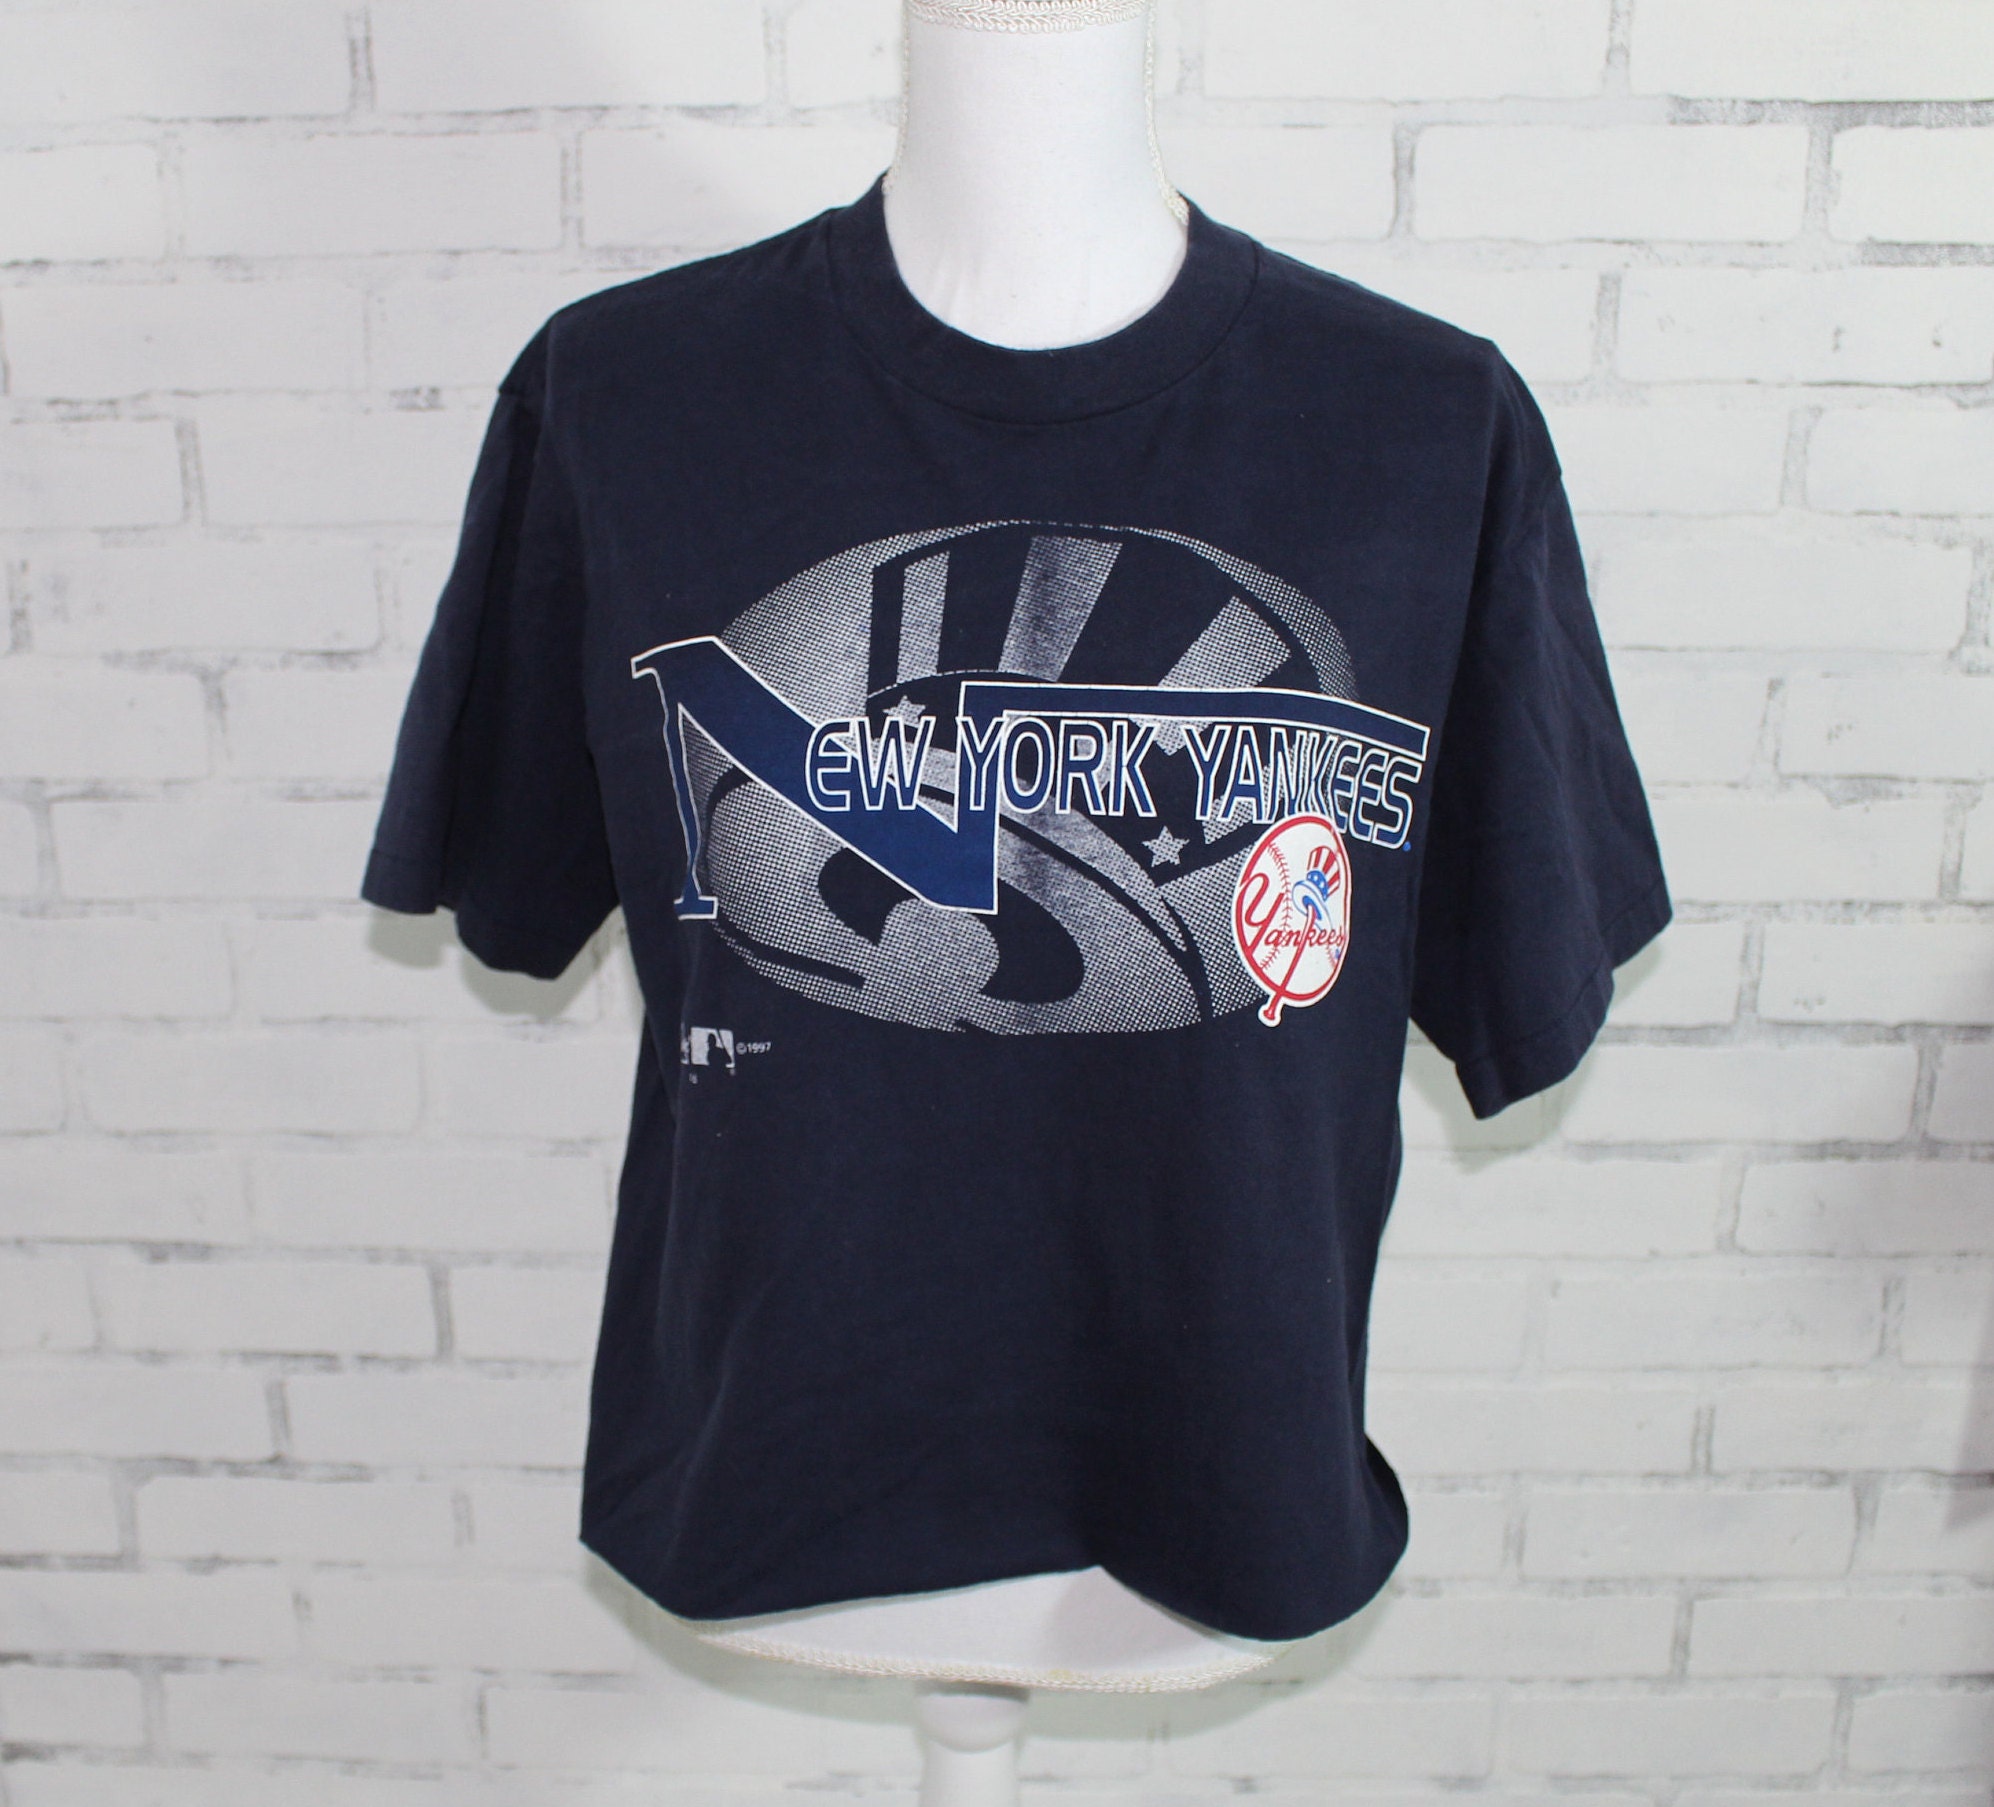 New York Yankees Vintage Graphic T-Shirt (Rare One of A Kind)